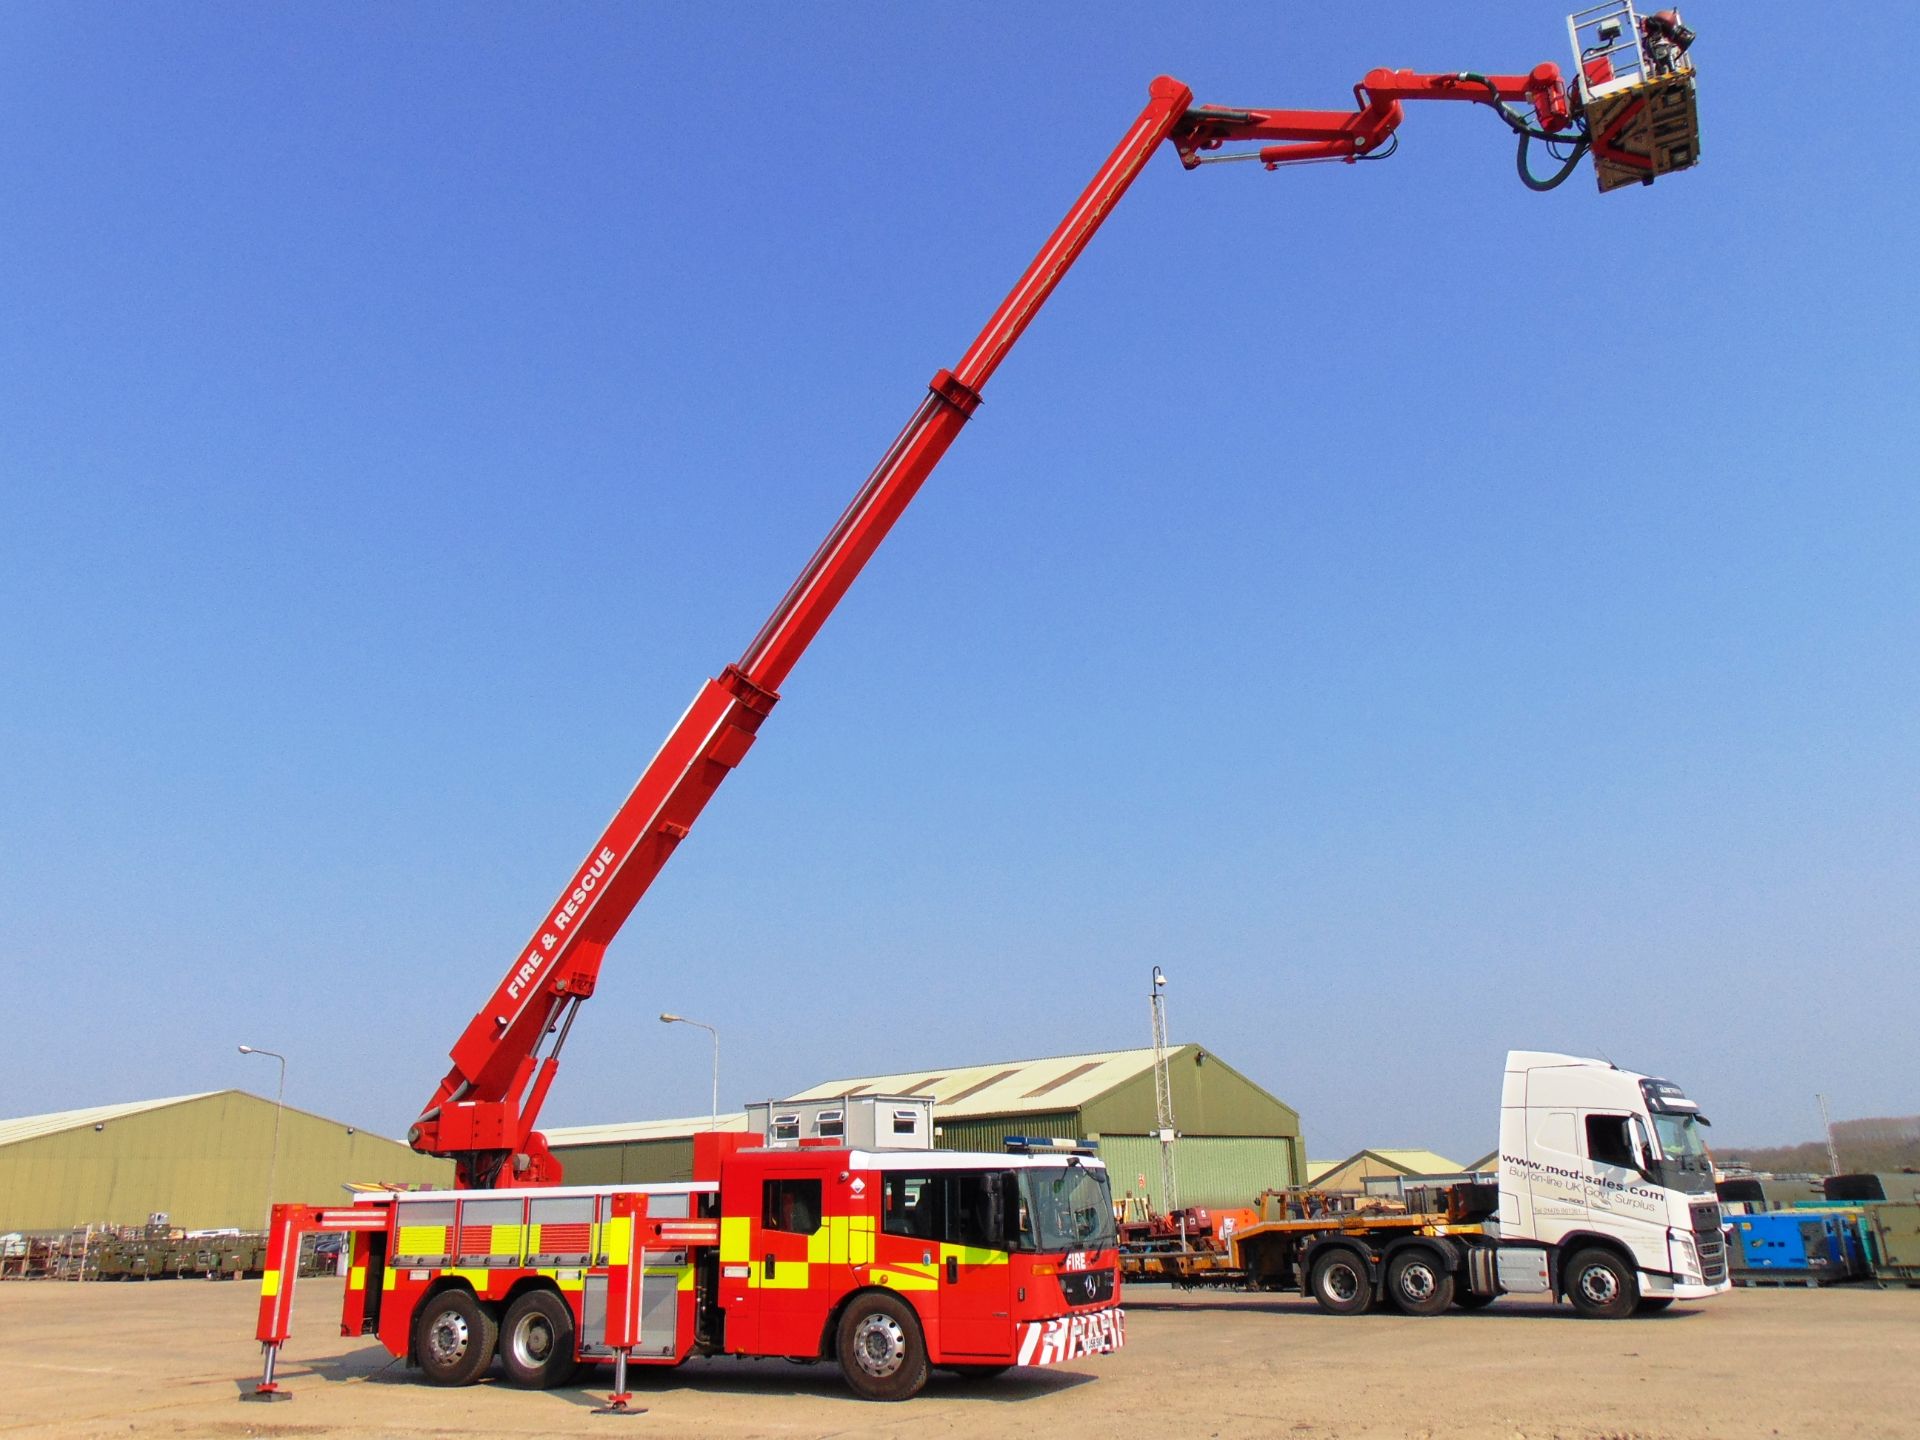 Mercedes Econic 2633 Aerial Rescue Fire Fighting Appliance - Image 6 of 57